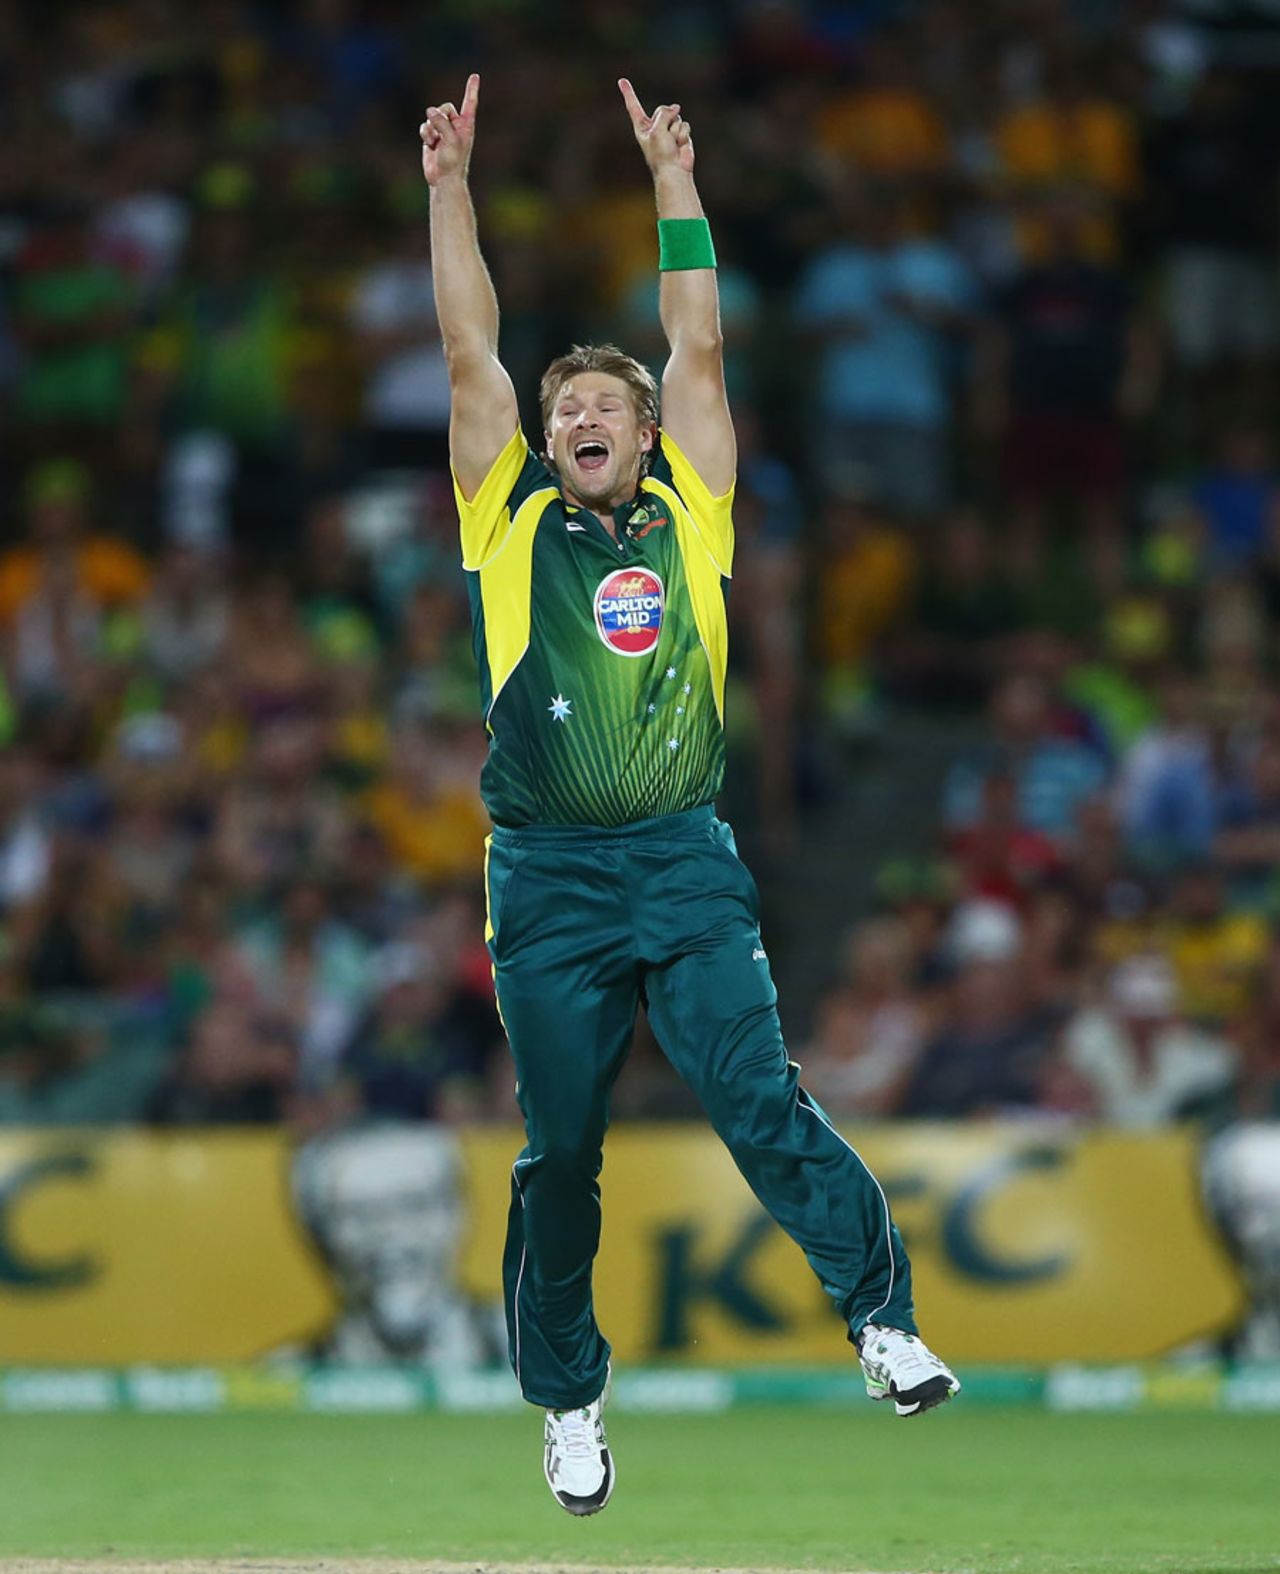 Shane Watson is overjoyed after picking up the final wicket, Australia v England, 5th ODI, Adelaide, January 26, 2014